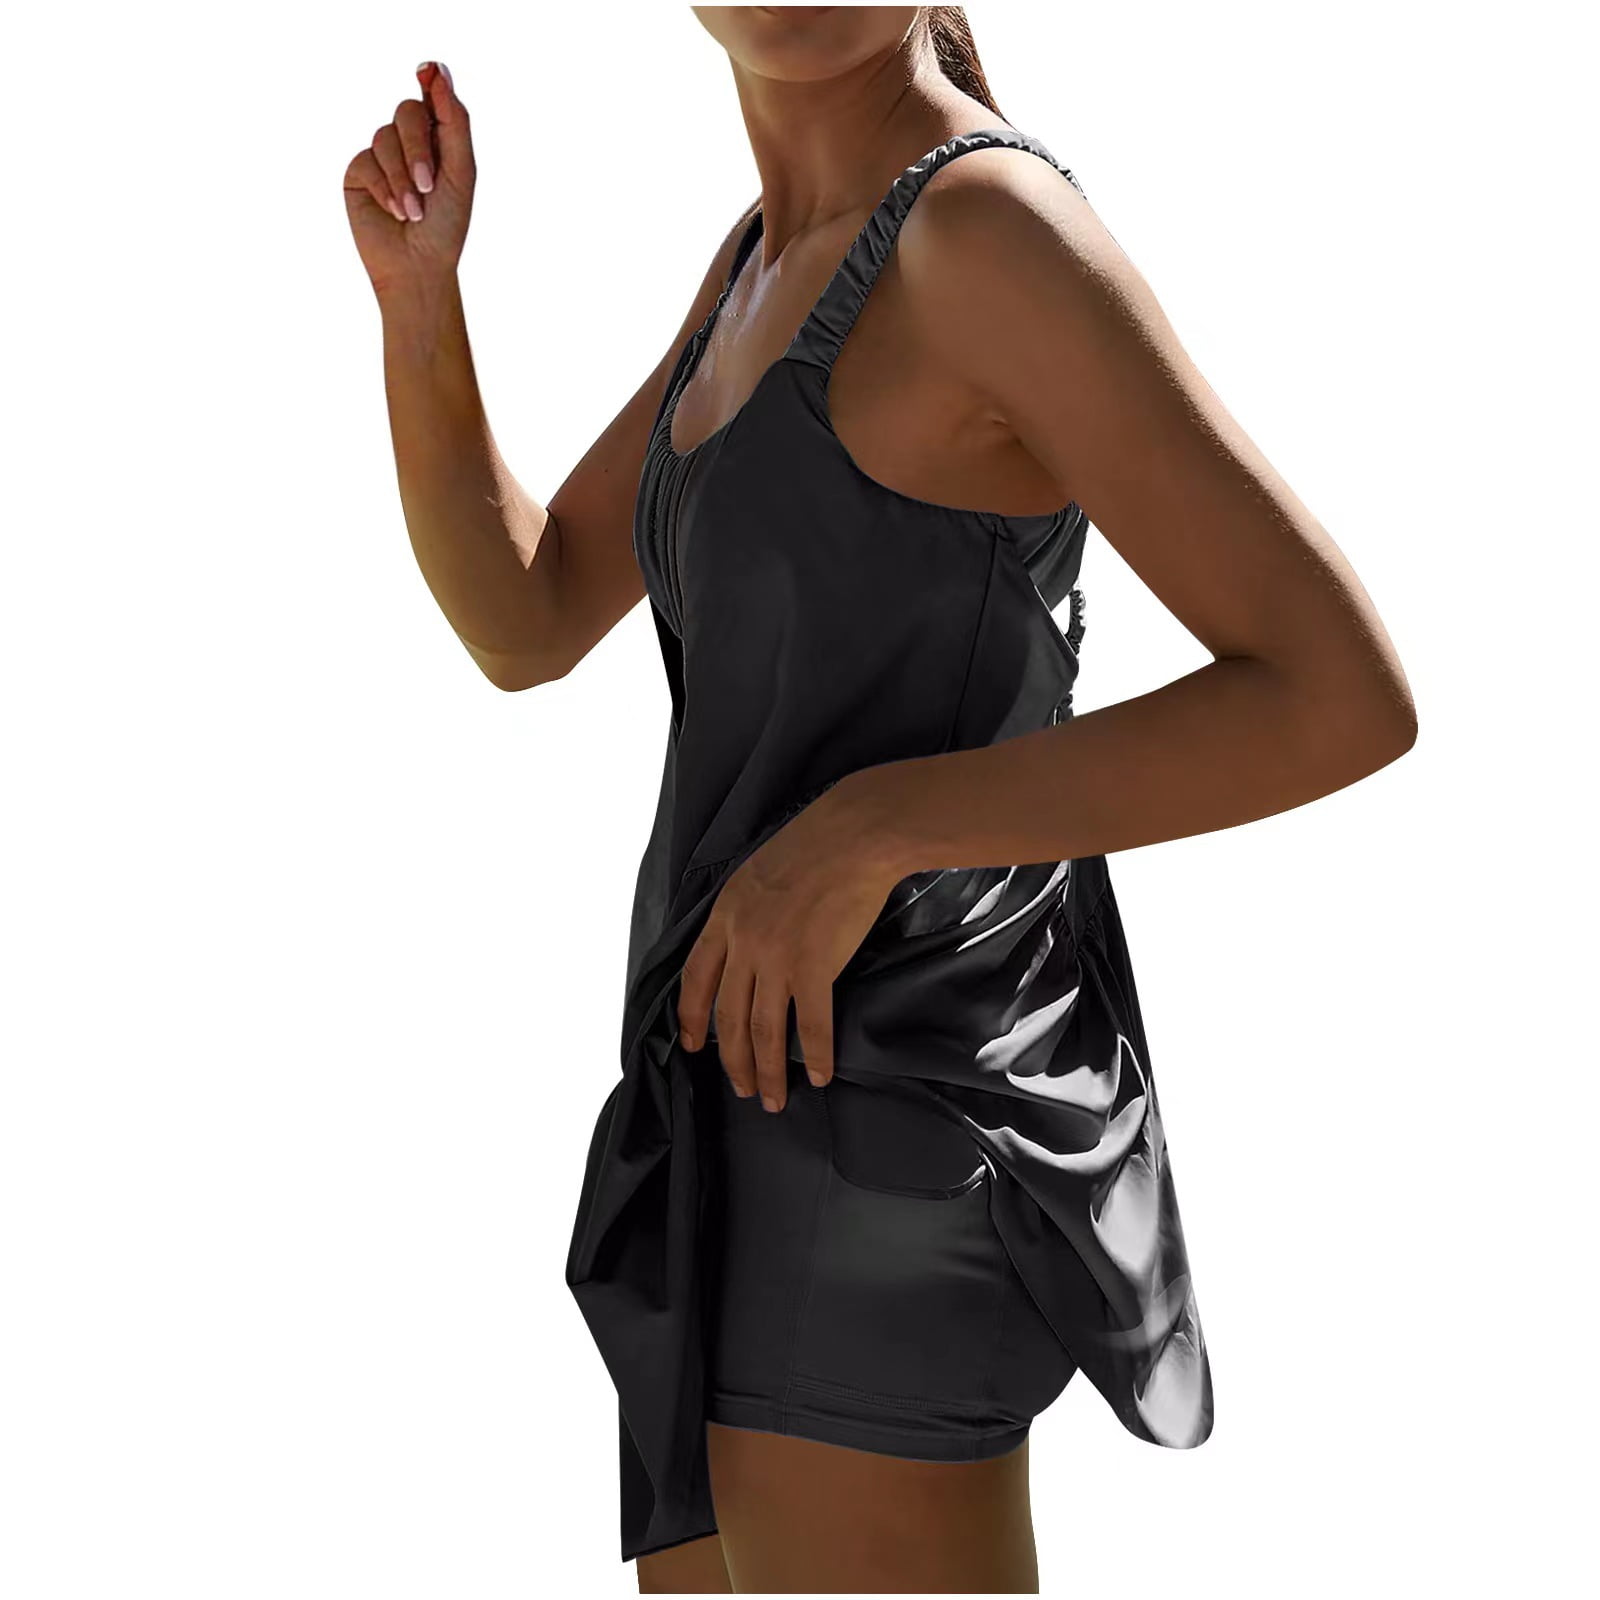 Womens Tennis Dress Built-In Bra and Shorts Workout Dresses Casual  Sleeveless Backless Athletic Golf Dress Short Romper 